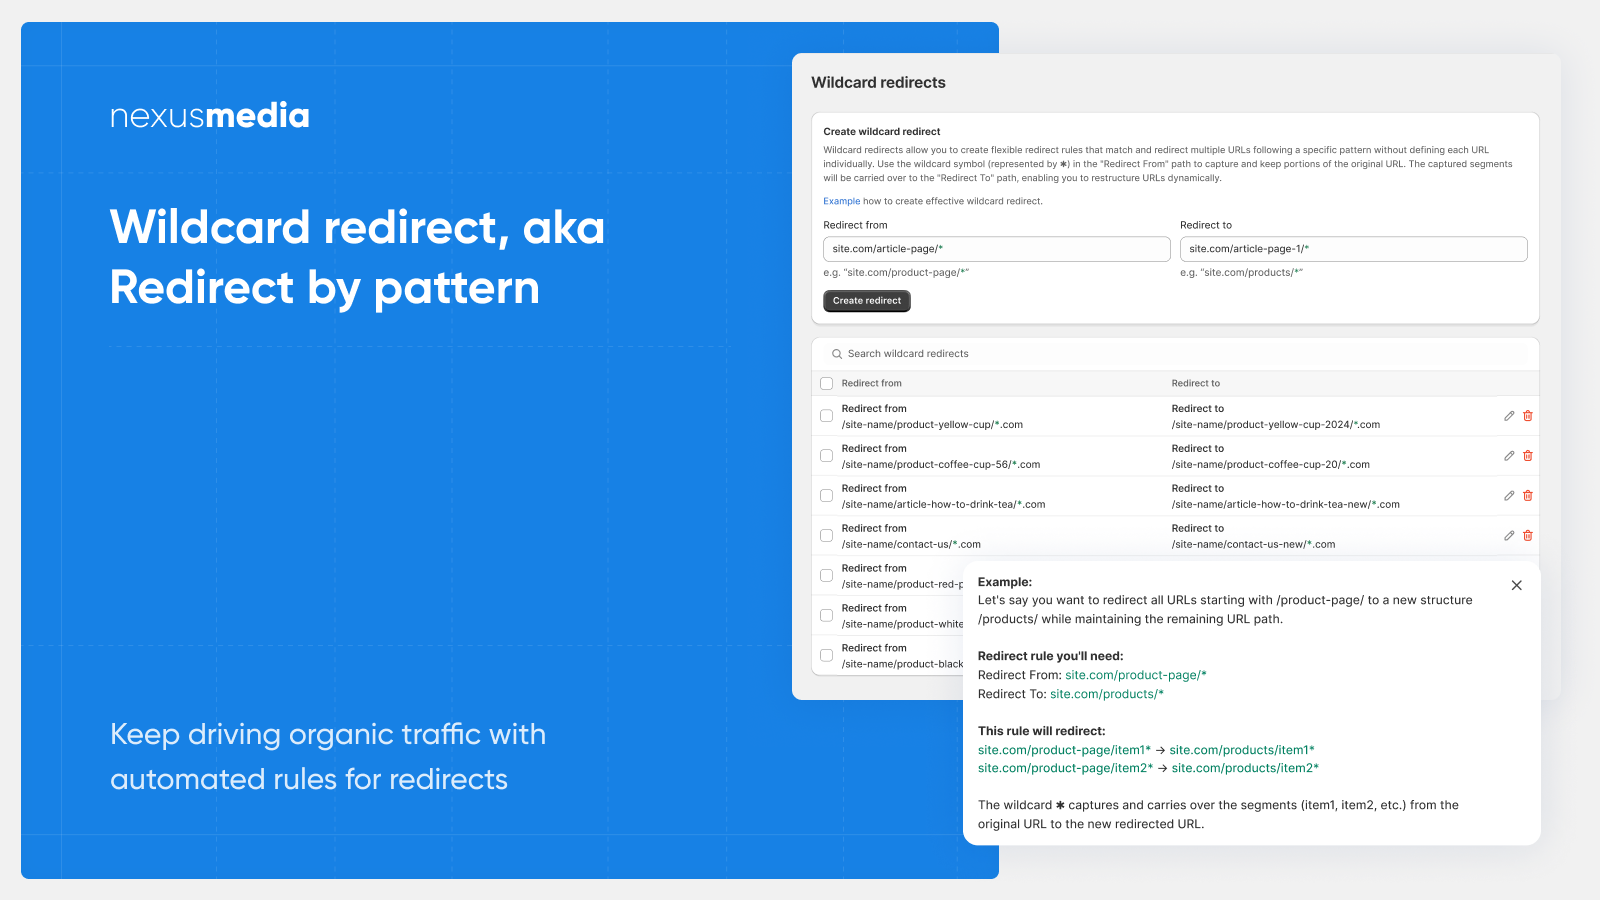 Wildcard redirect to setup auto rules for redirects